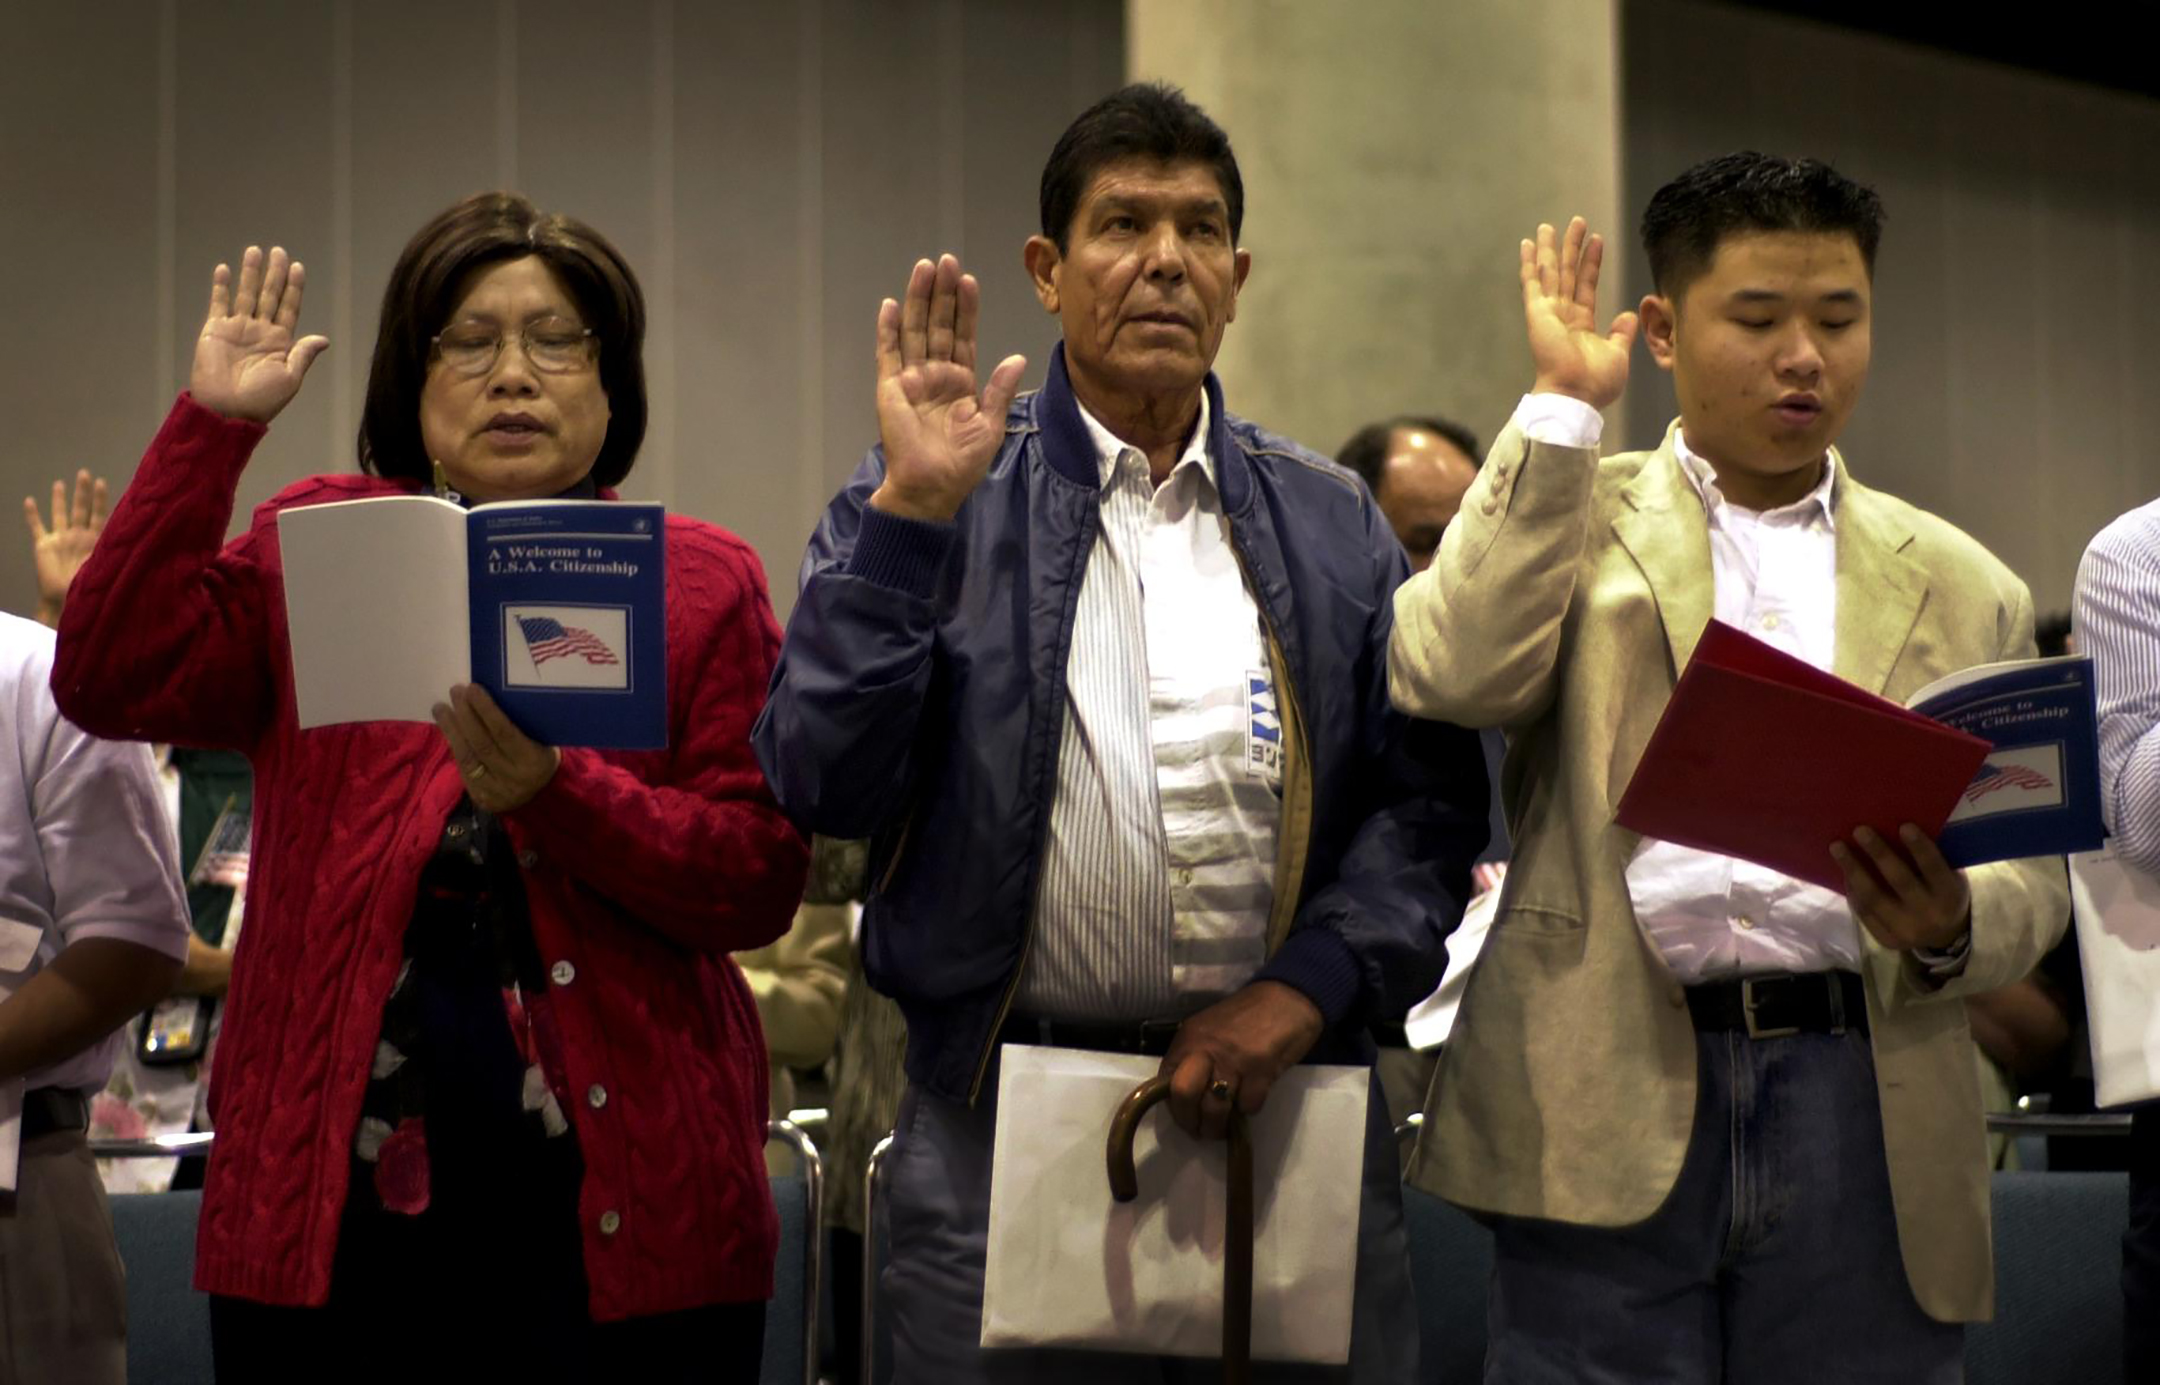 three people, from left, a woman and two men, raise their hands as they take the oath of citizenship